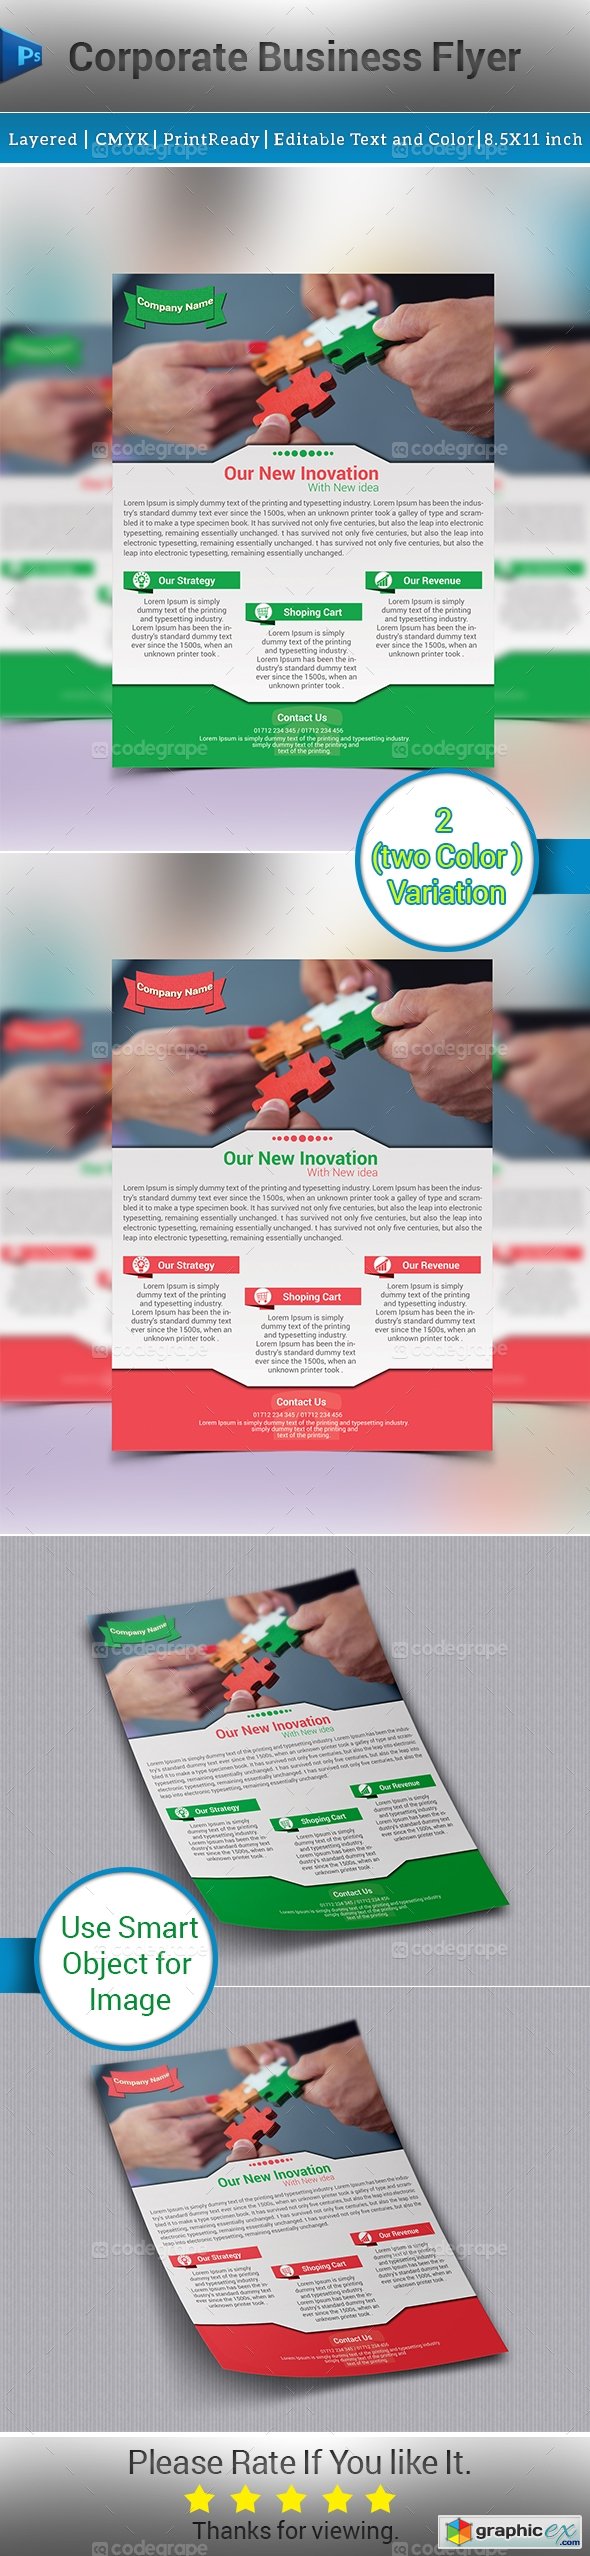 Corporate Business Flyer (2 Colors)